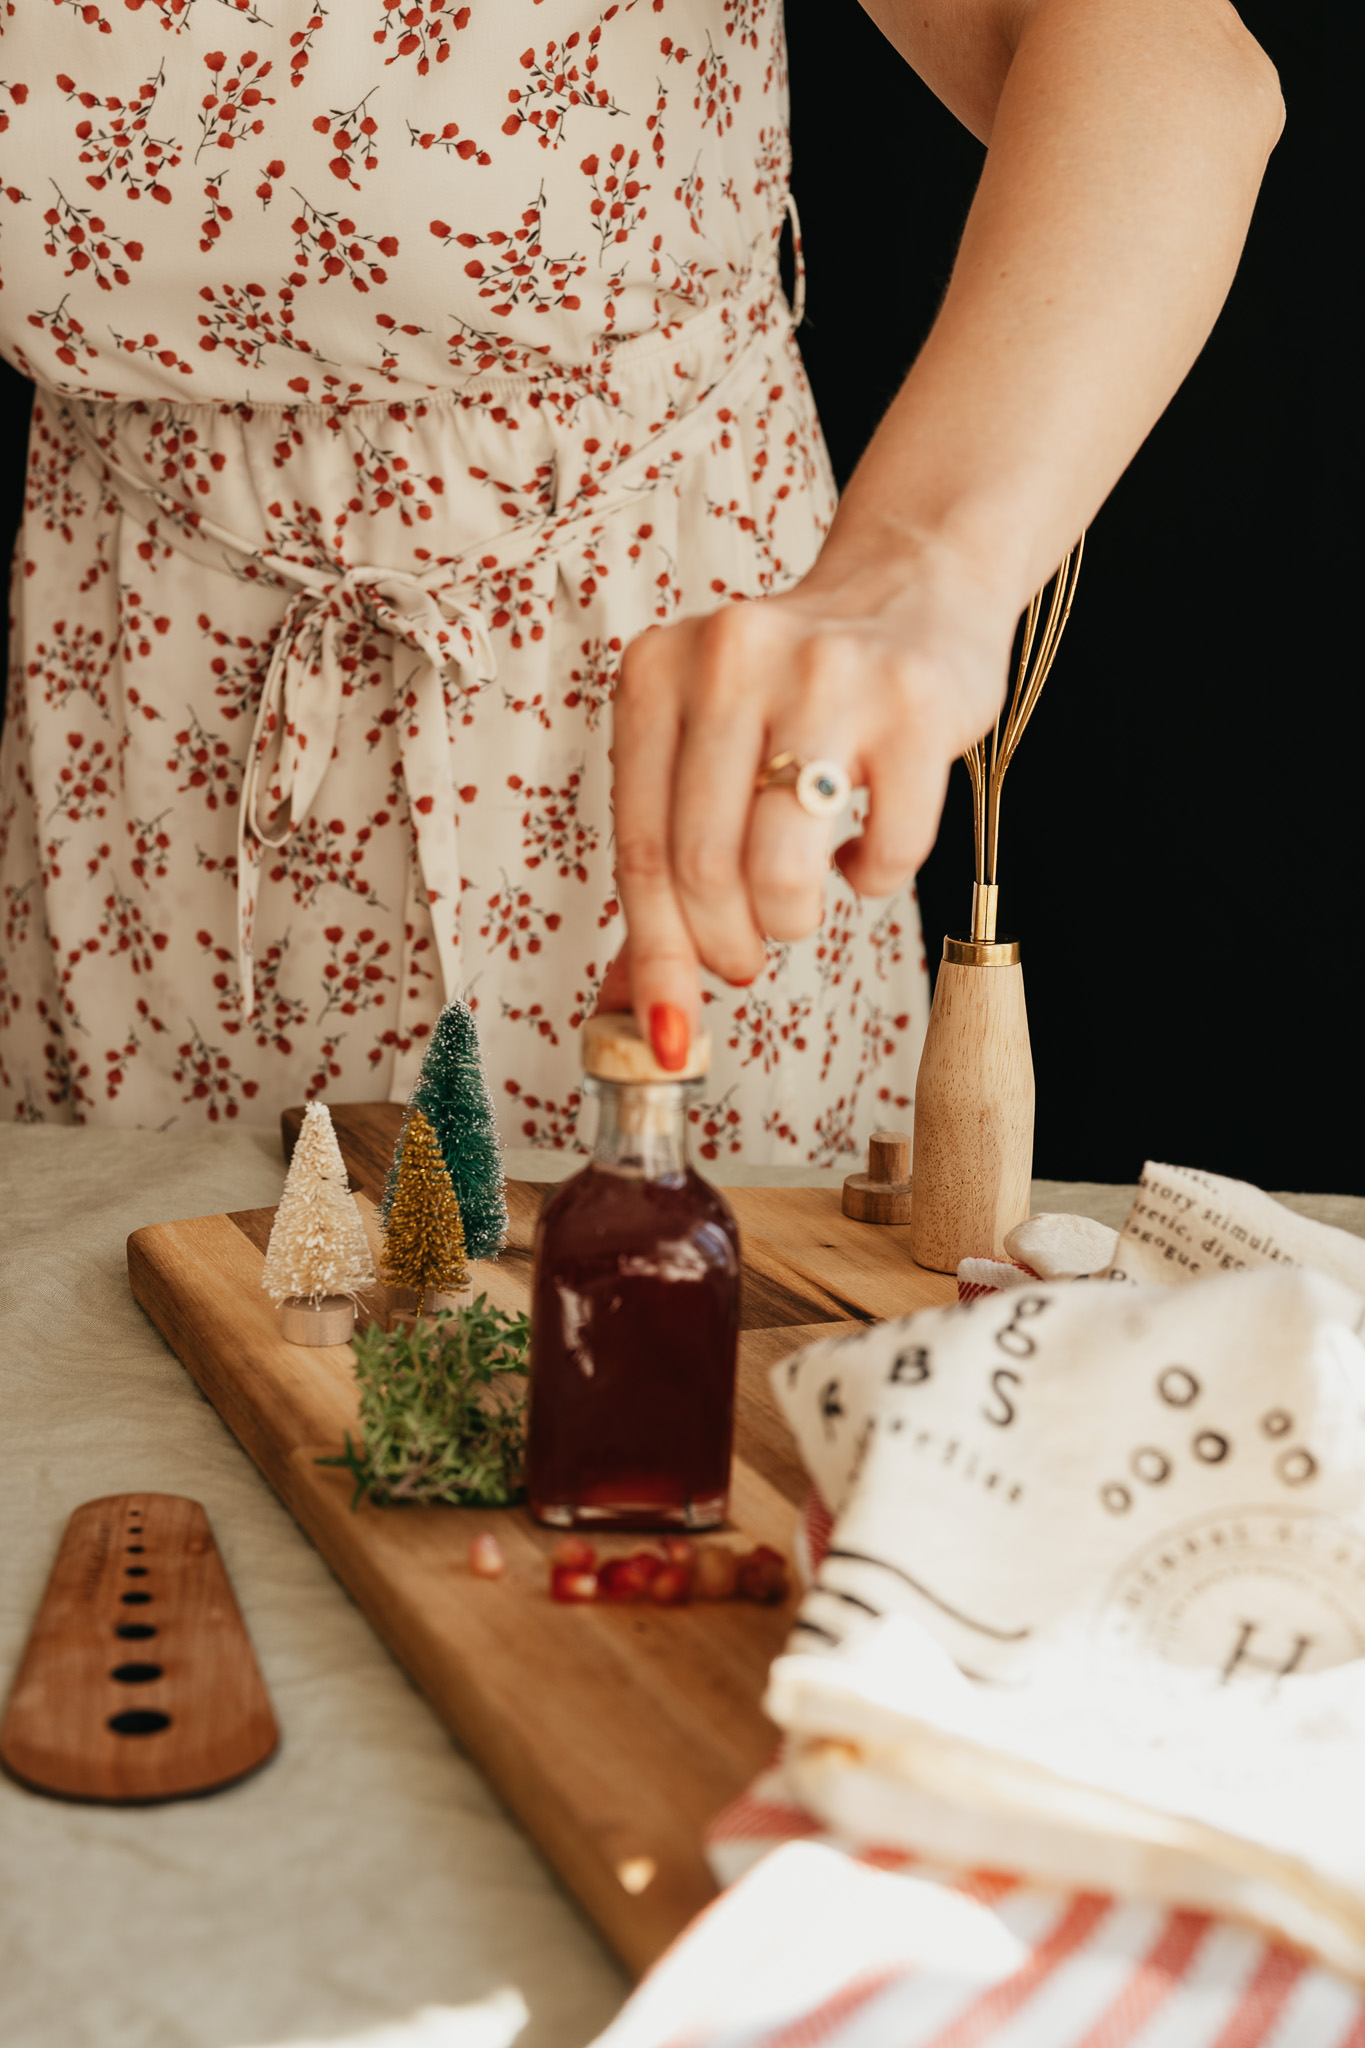 herbalist putting lid on bottle of pomegranate syrup